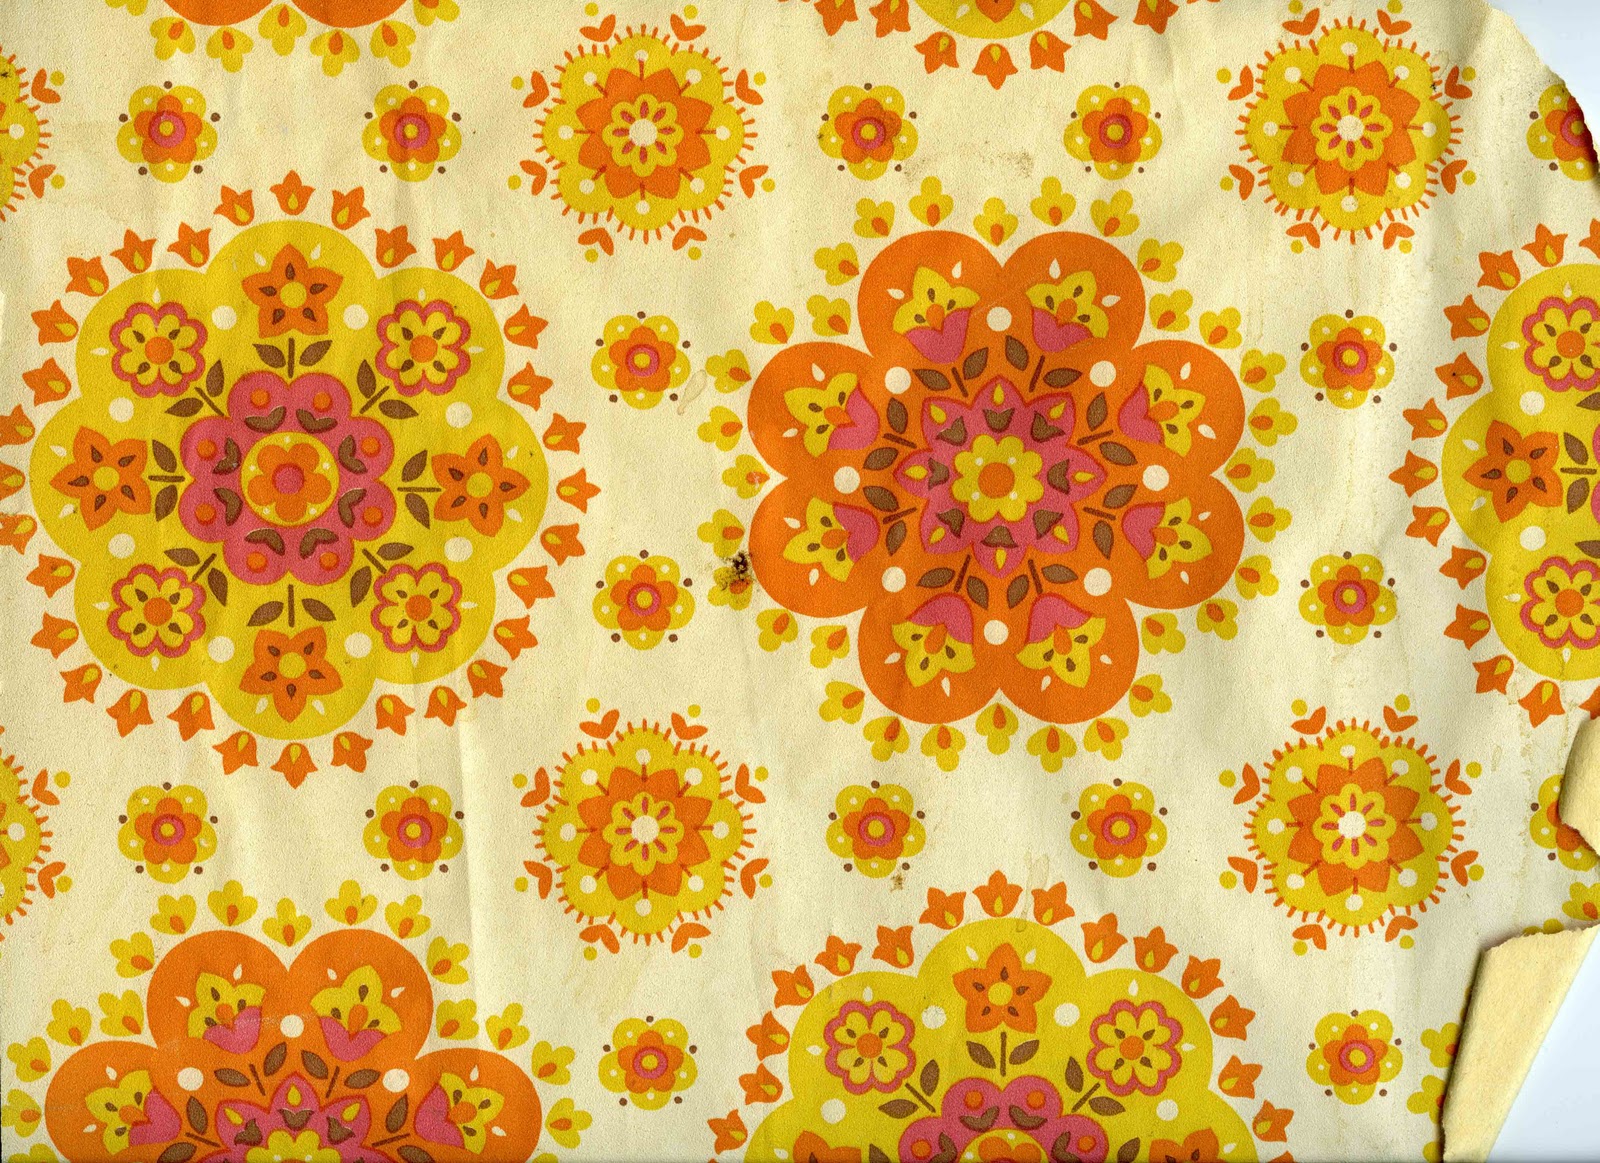  Blog A good piece of 60s or 70s wallpaper can liven up any day